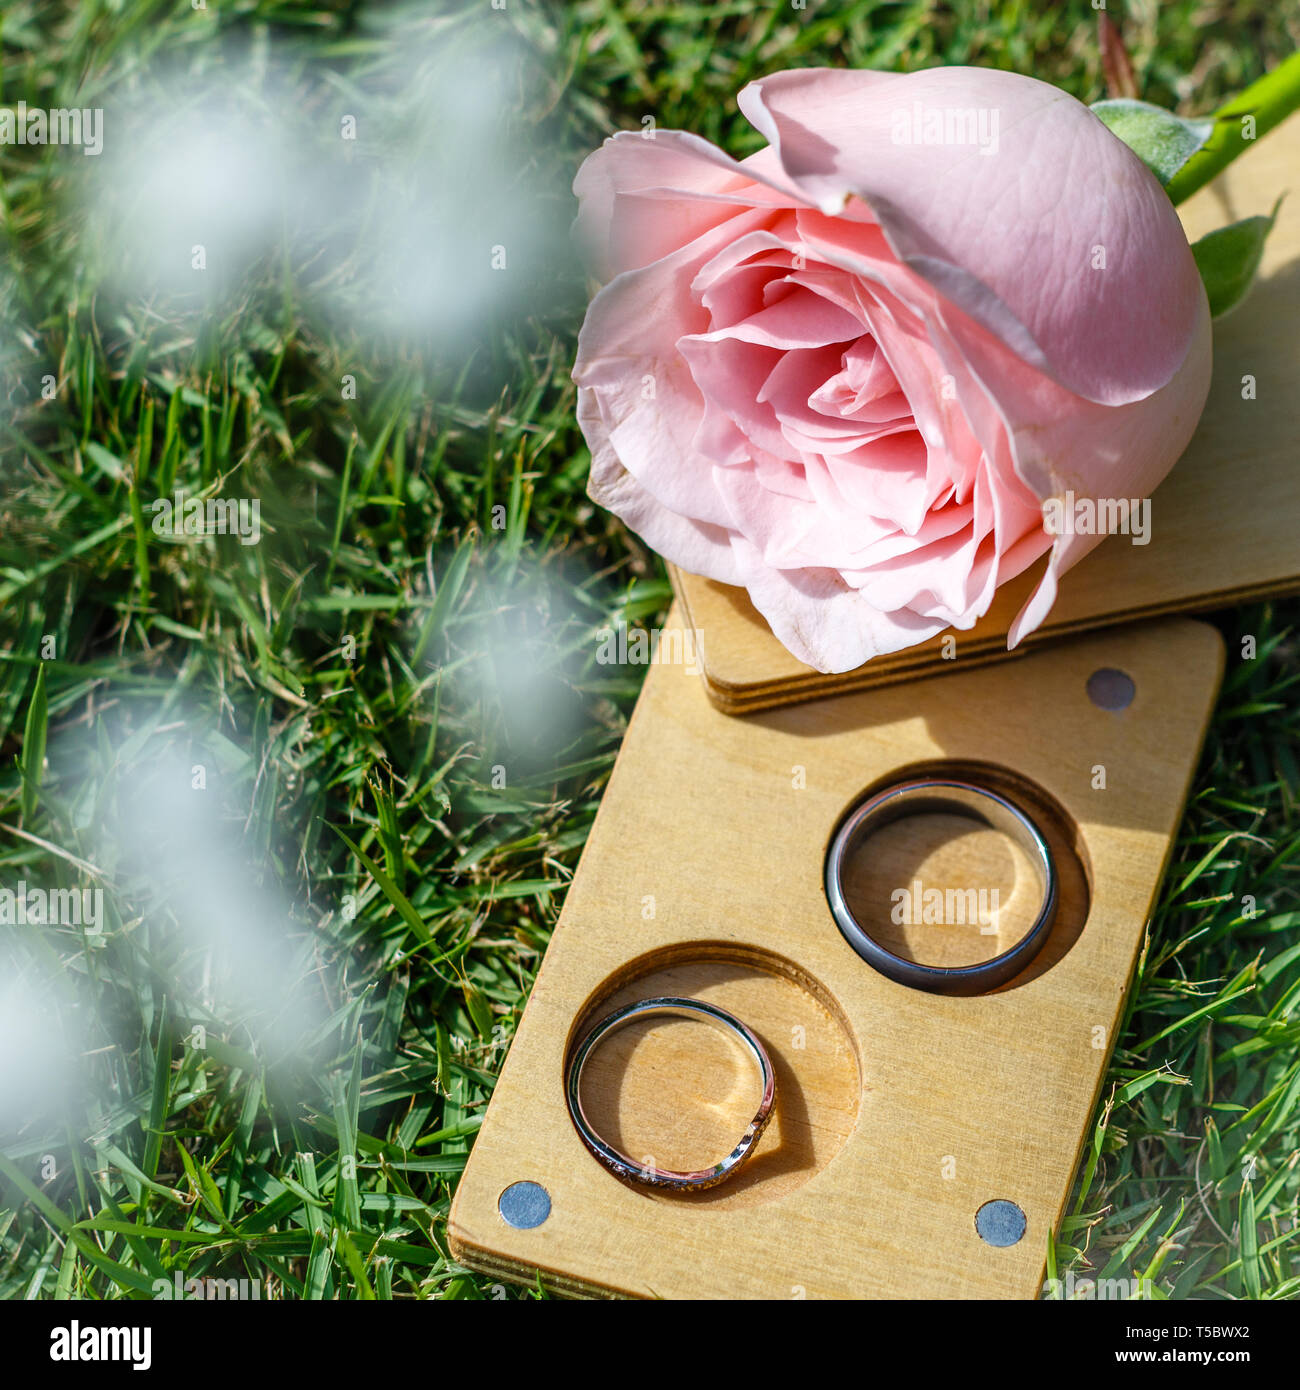 White gold and titanium wedding rings in a wooden slide box. Pink rose. Green grass on the background. Close up. Stock Photo